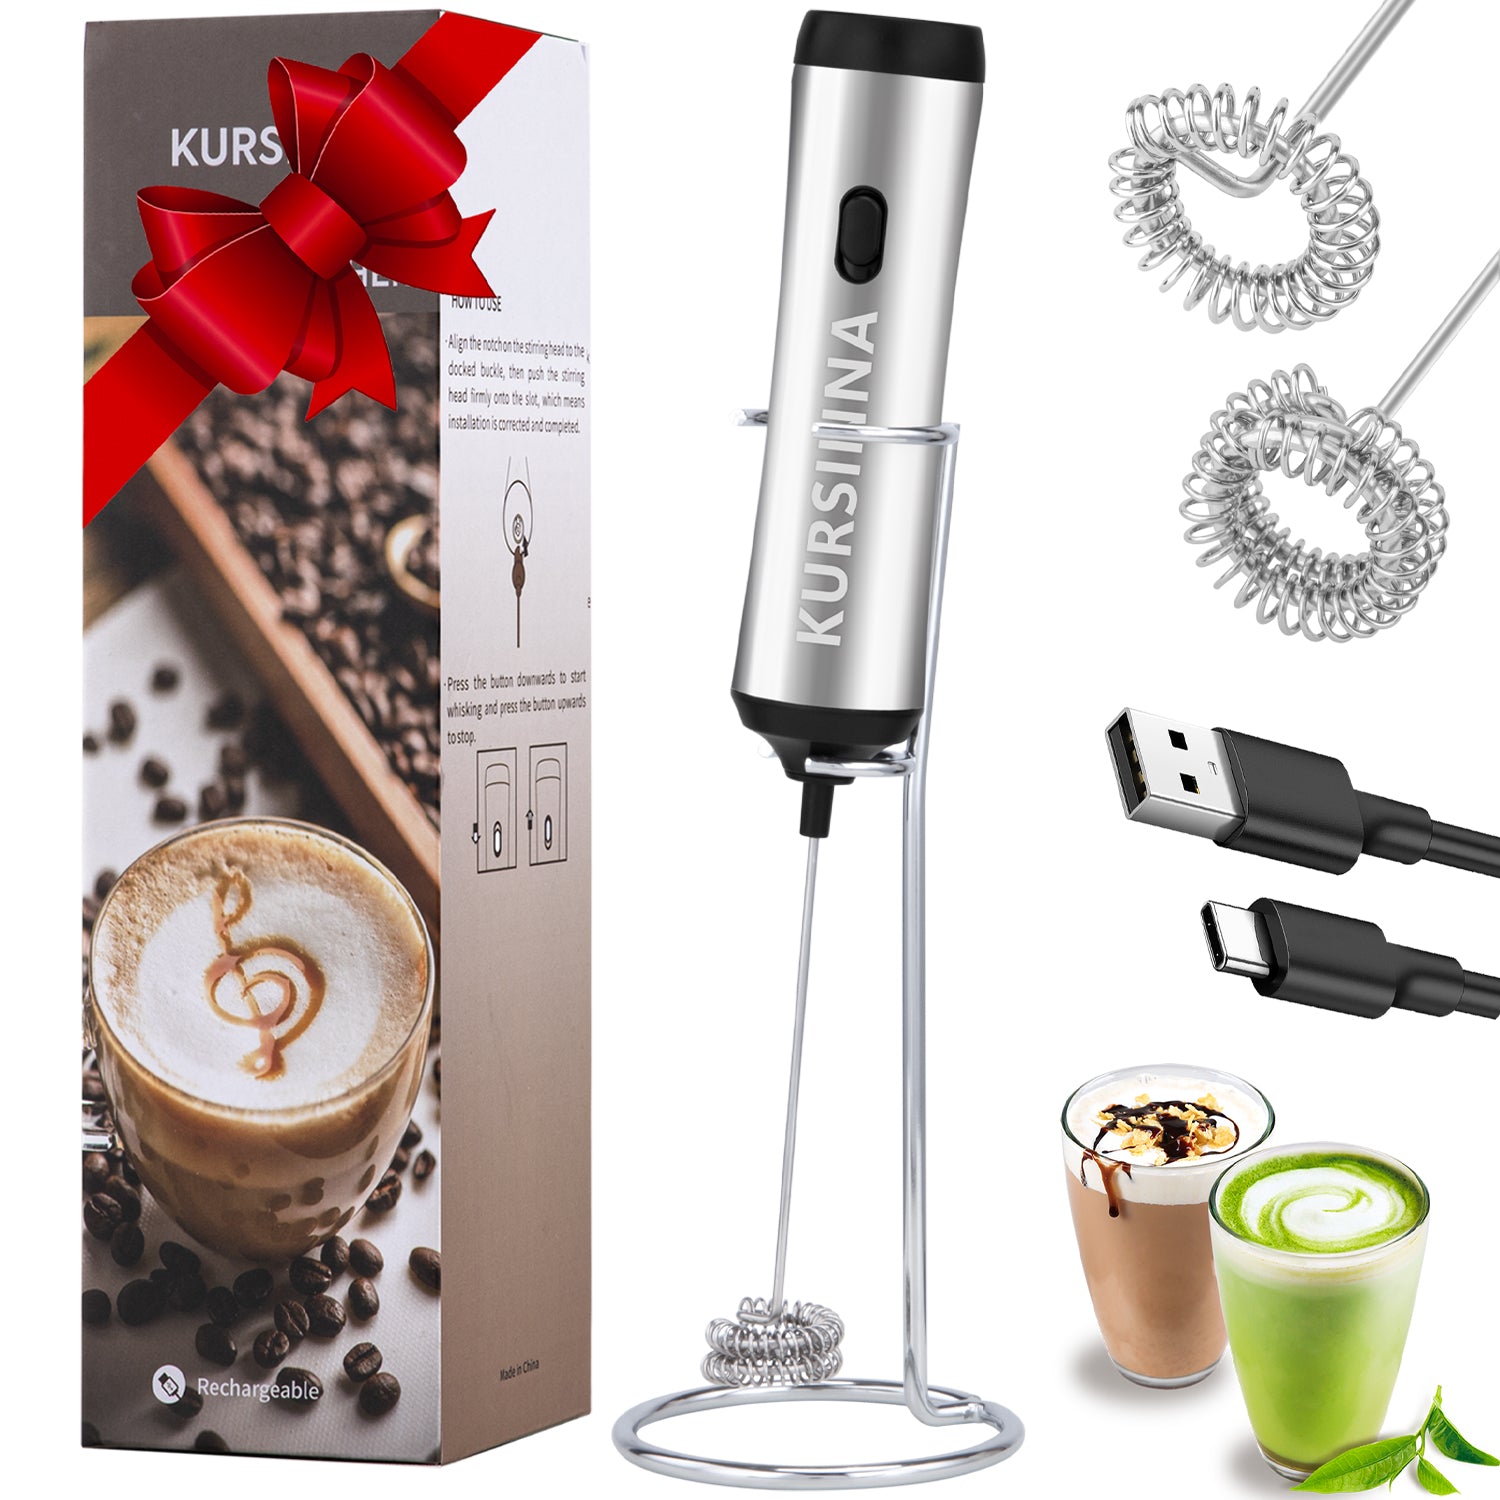 Electric Milk Frother Handheld, Maestri House USB Type-C